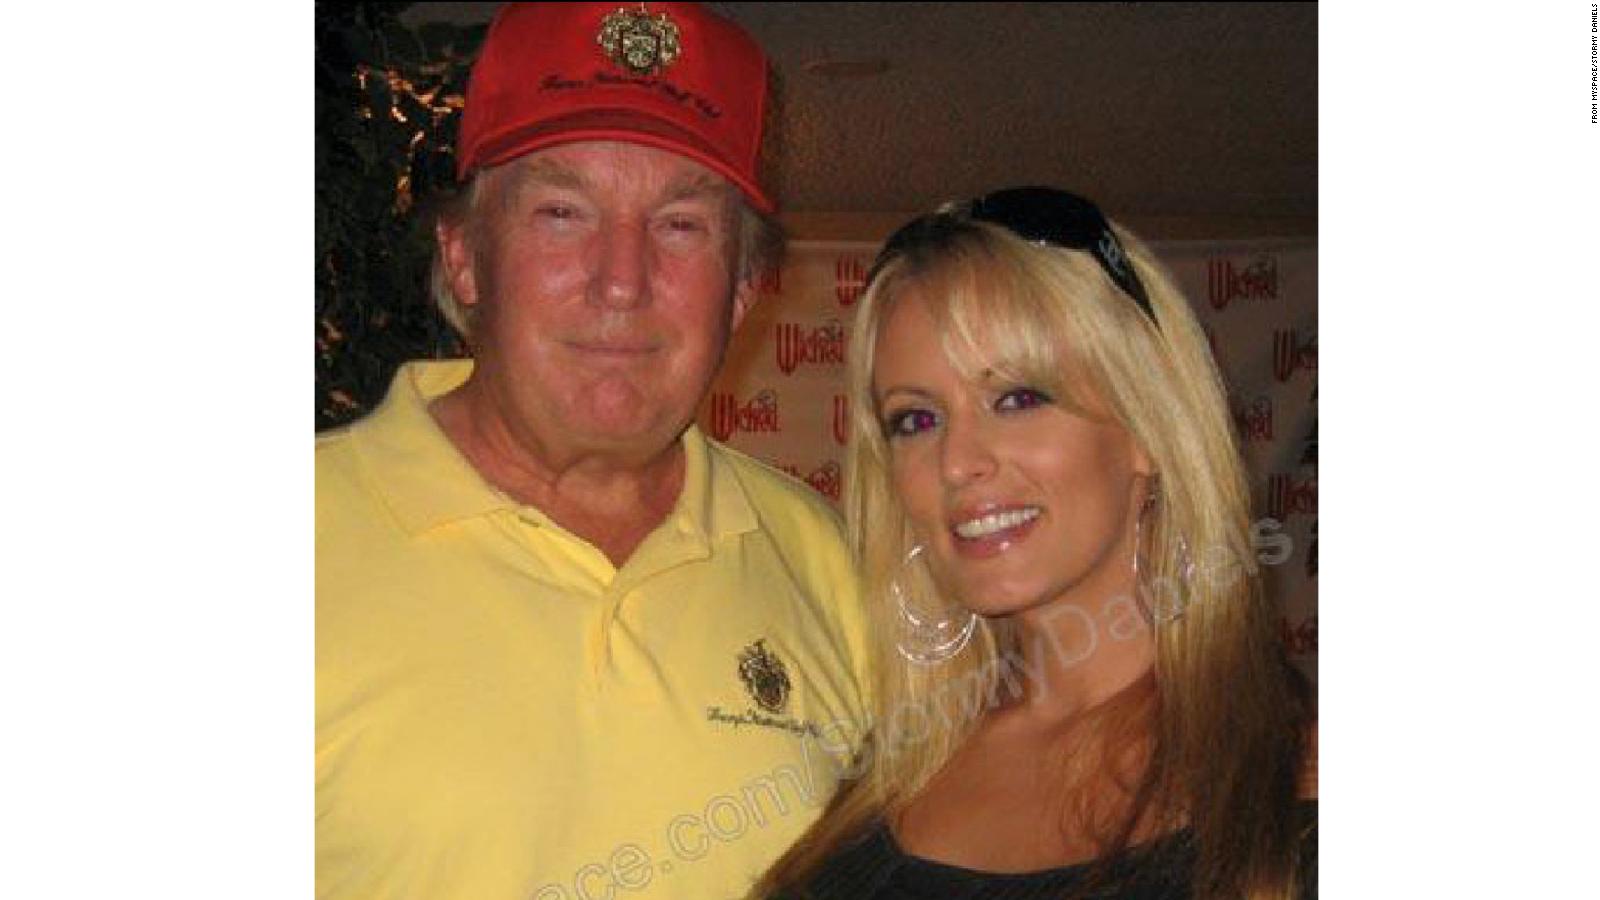 There are many, many similarities in Stormy Daniels' Karen McDougal's stories about Donald Trump ...